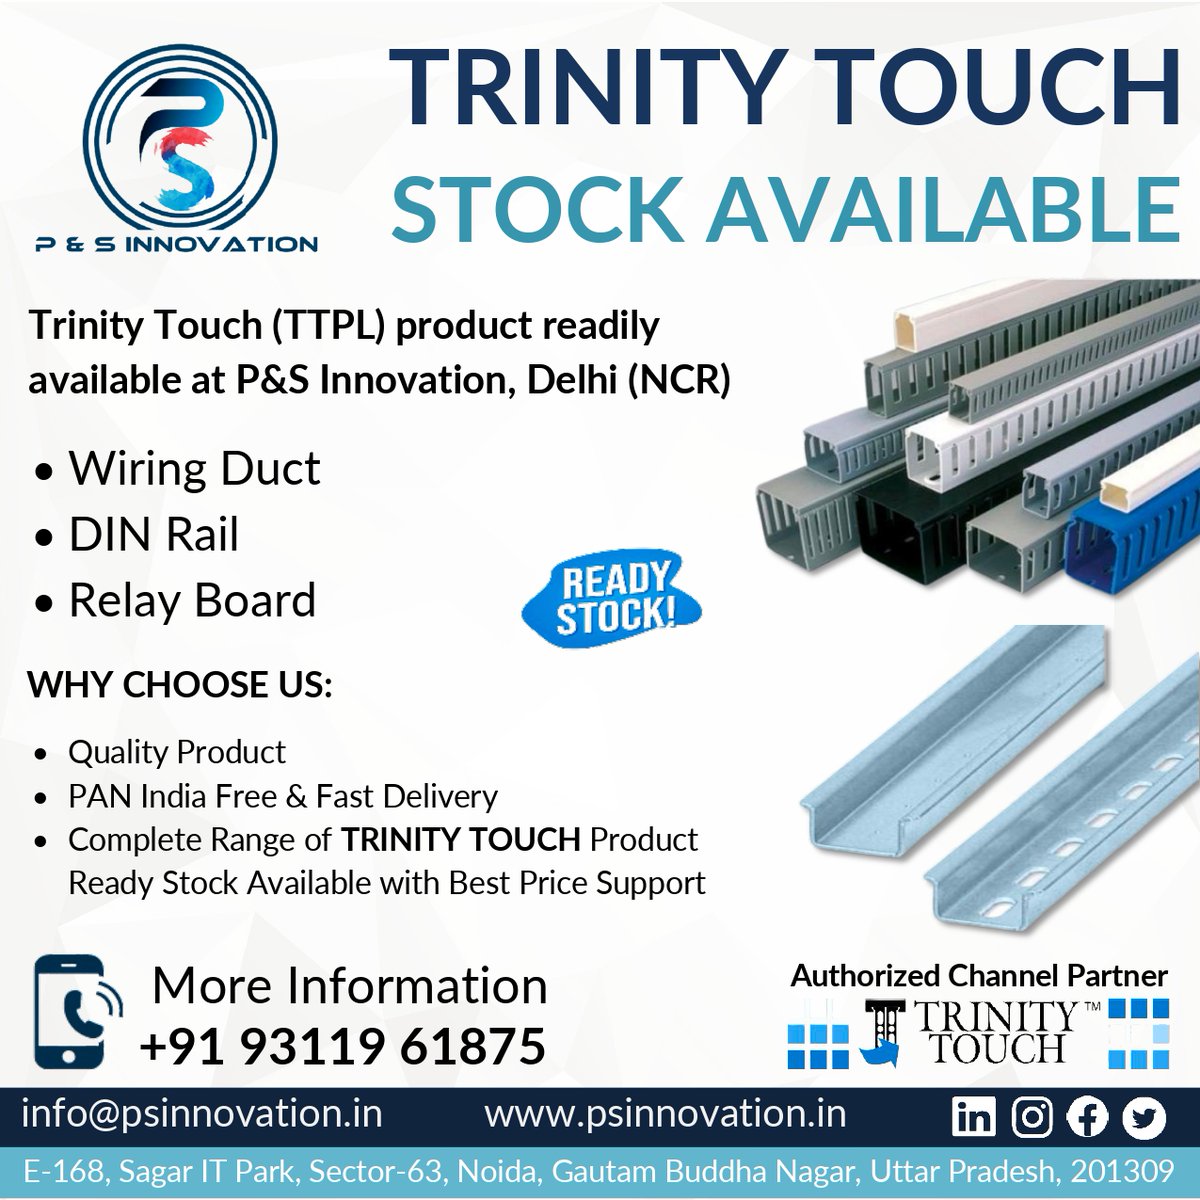 Wiring ducts are rigid trays typically used as raceways for cables and wires within electrical enclosures. 

For More Information WhatsApp us on
wa.me/919821440617

#industrialautomation #trinitytouch  #industrailautomationindustry #wiringduct #duct #pvcducts #narrowduct